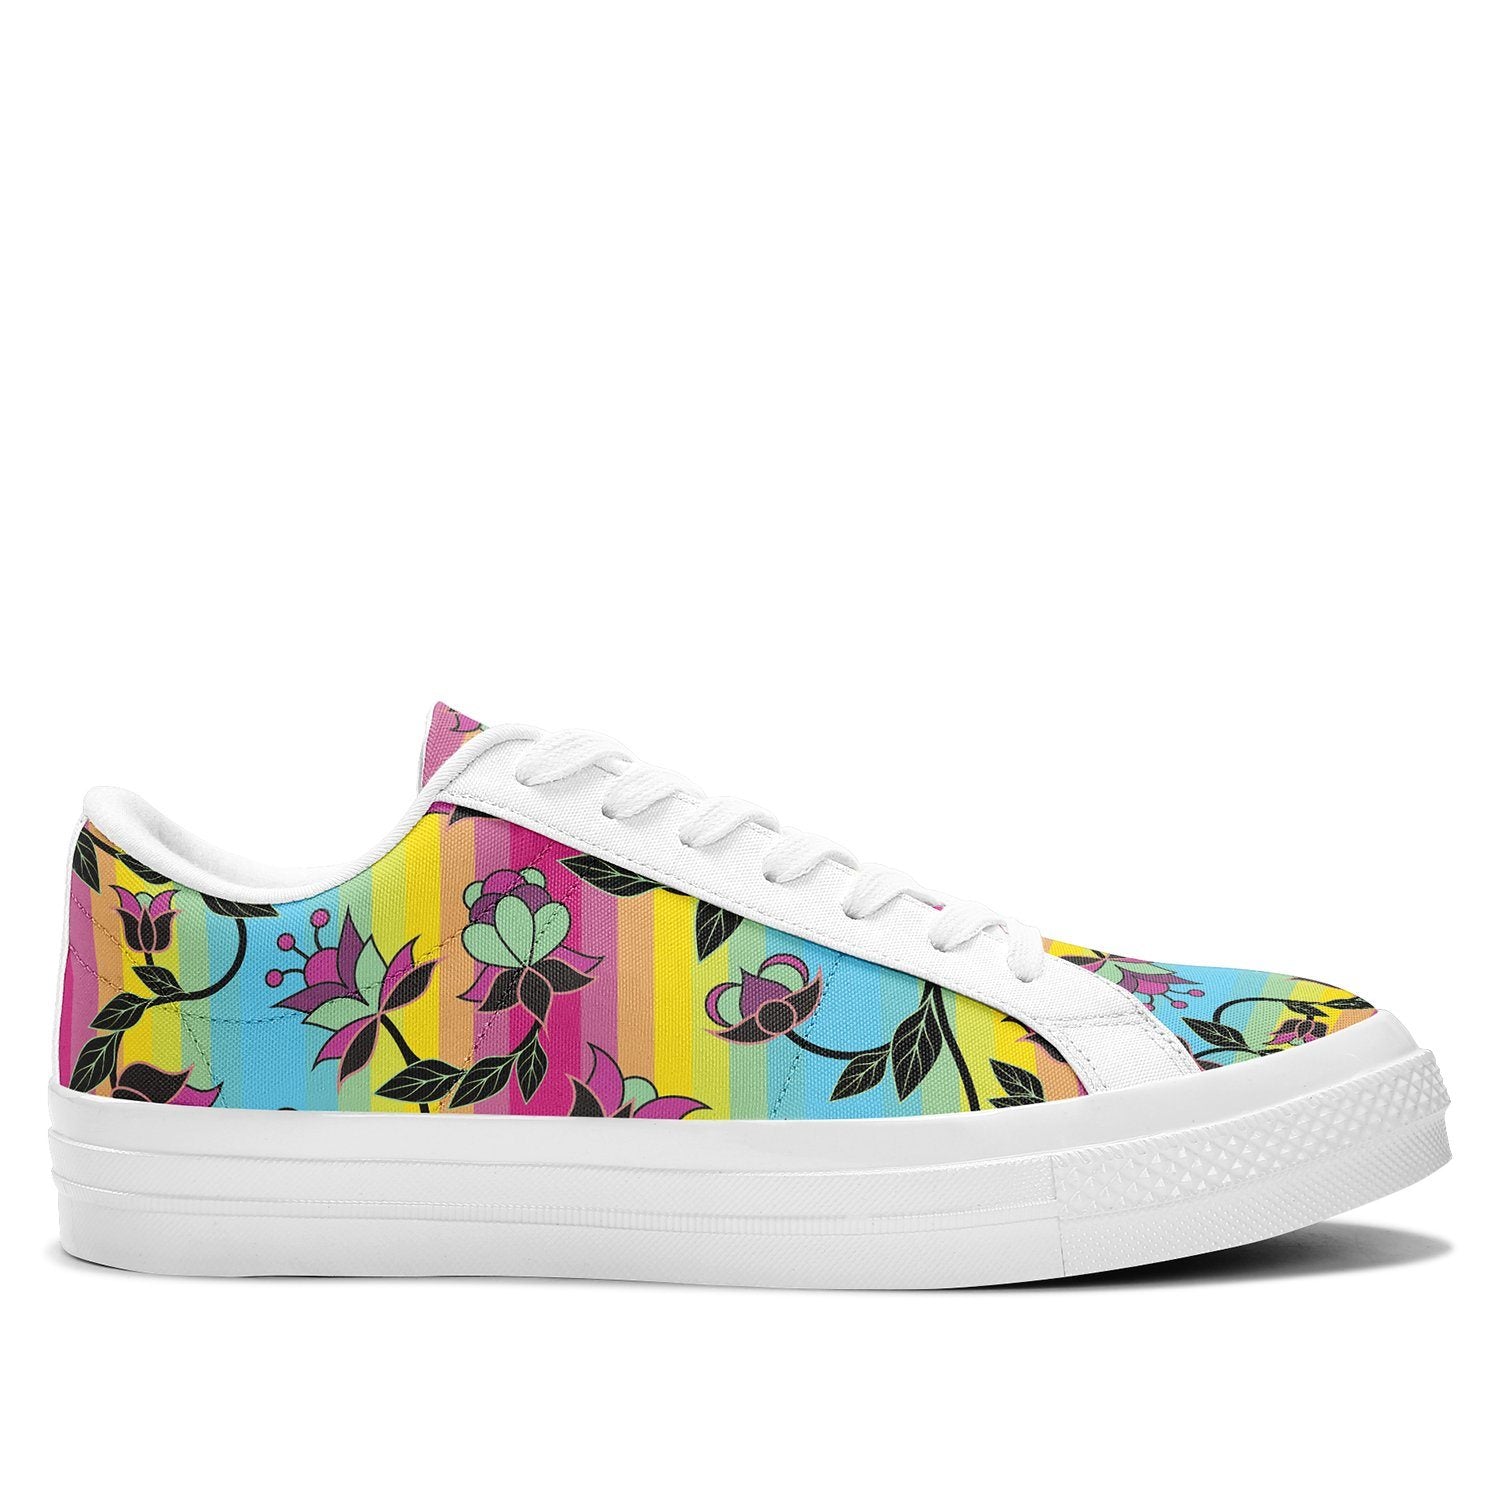 Powwow Carnival Aapisi Low Top Canvas Shoes White Sole aapisi Herman 